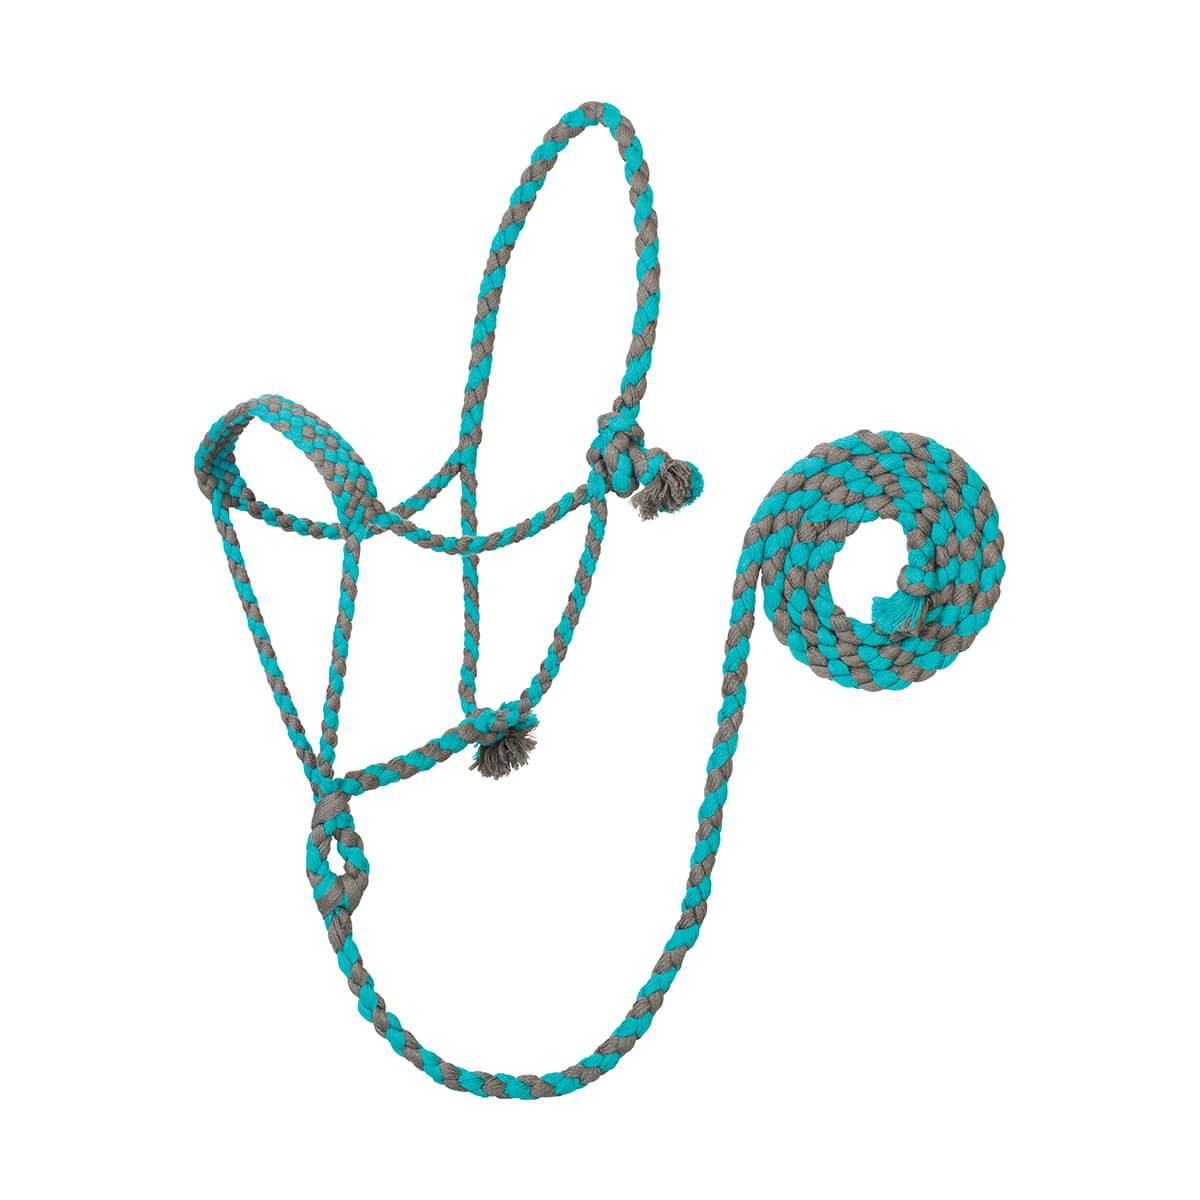 EcoLuxe Braided Rope Halter with Lead - Turquoise/Charcoal - 8-ft